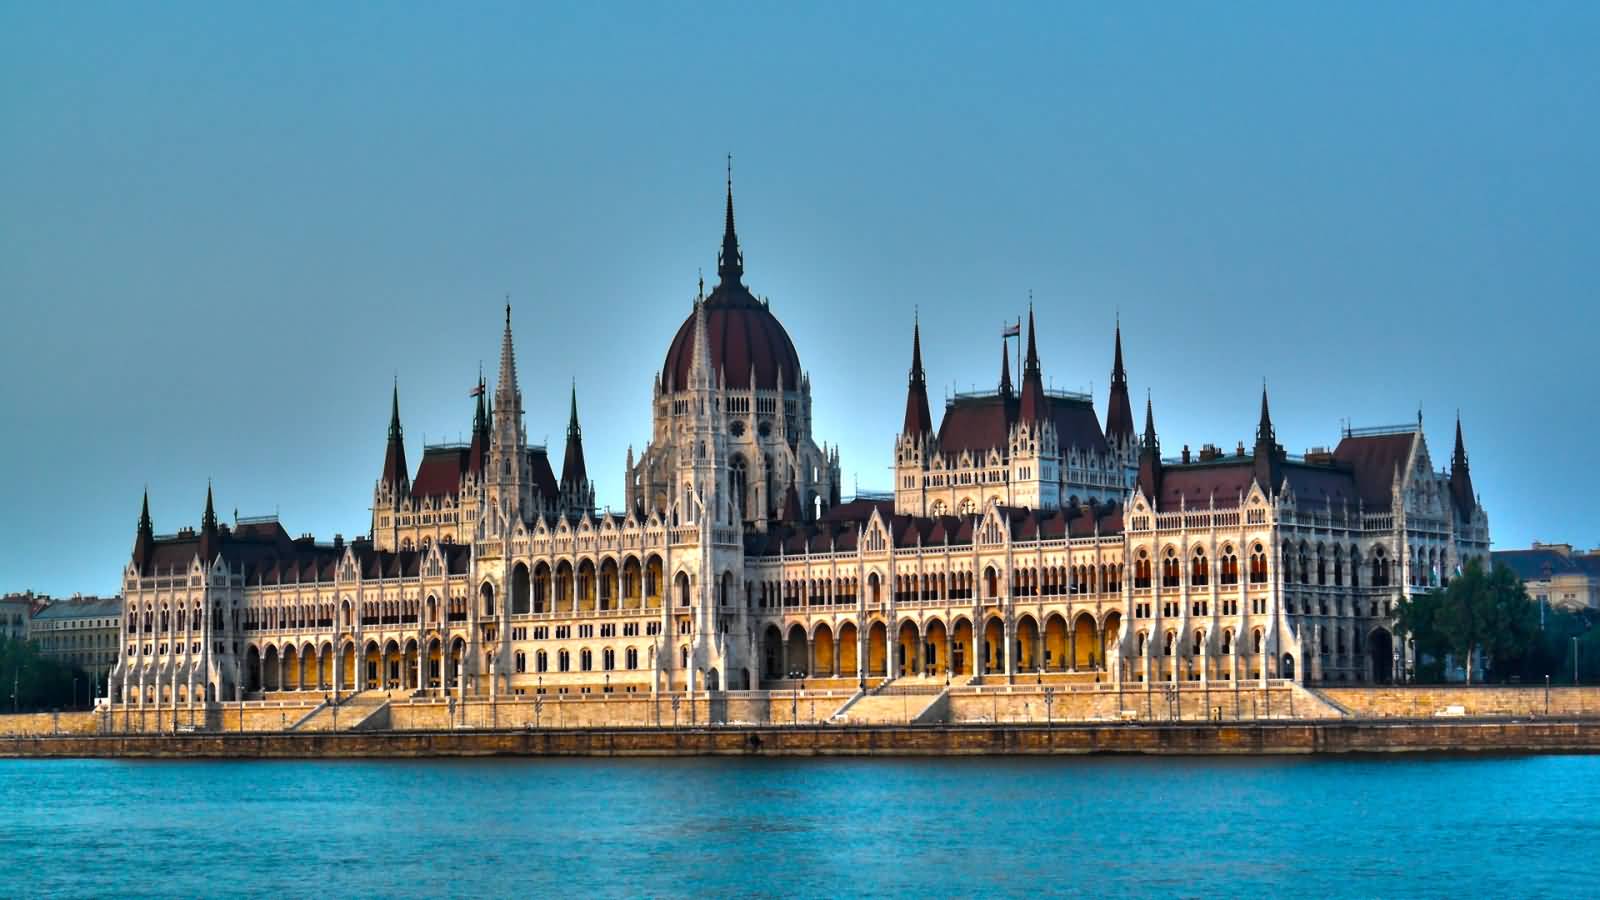 Hungarian Parliament Building On The Bank Of Danube River